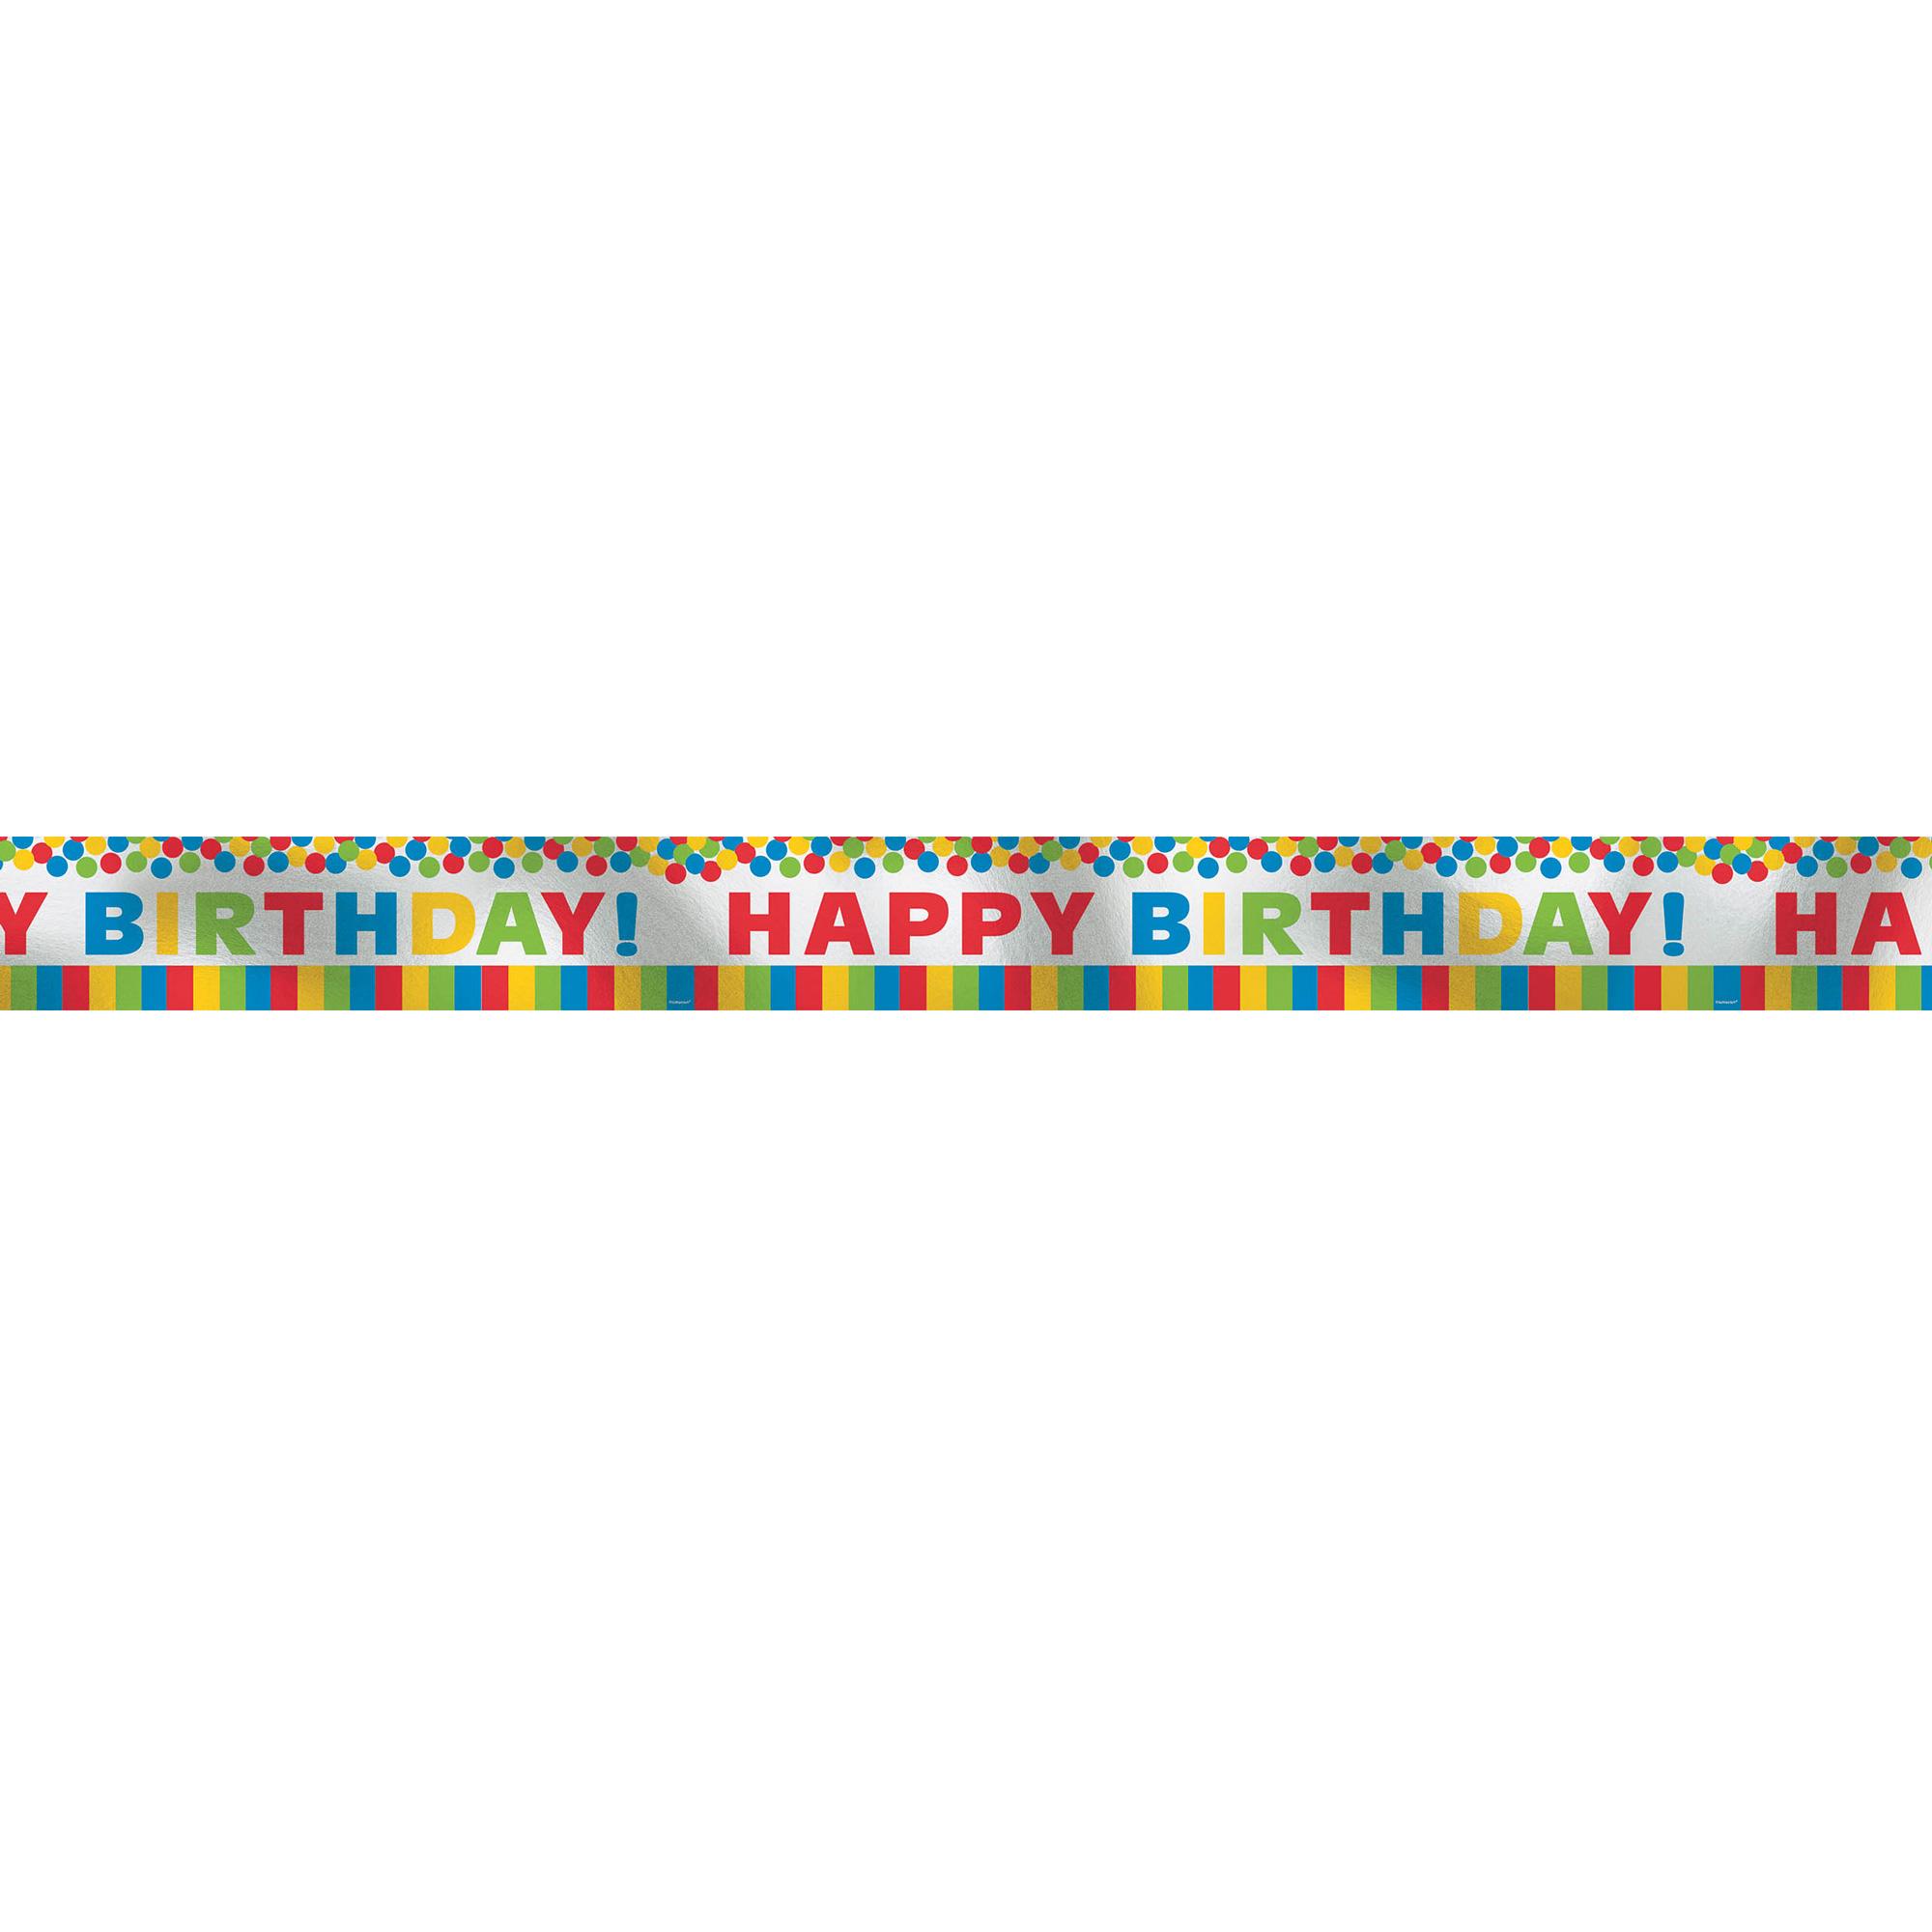 Primary Rainbow Happy Birthday Foil Banner 25ft Decorations - Party Centre